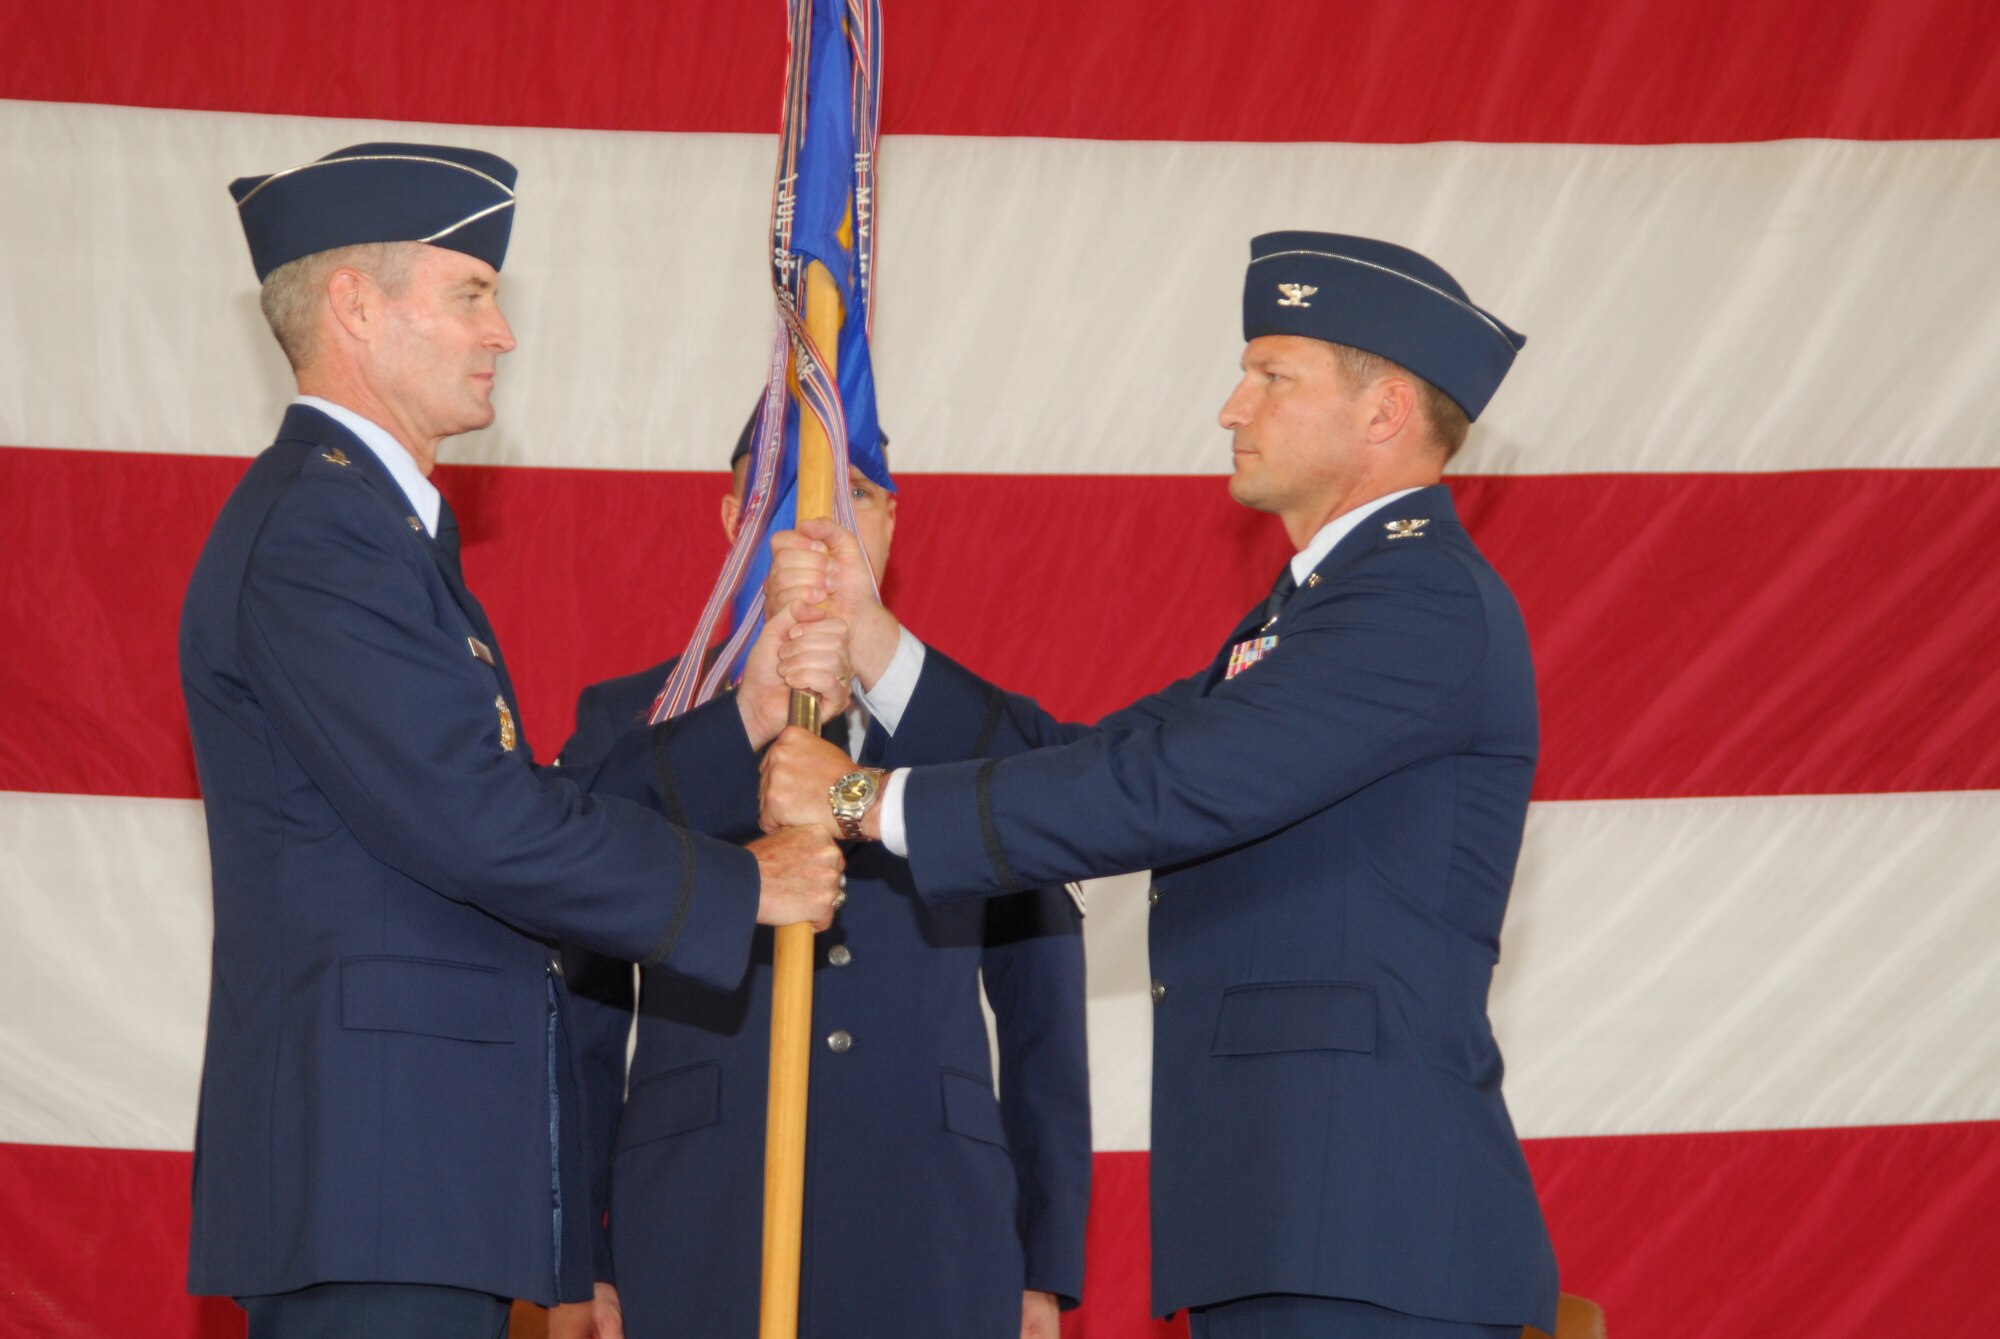 Col. Michael Fleck assumes command of the 325th Mission Support group from Brig. Gen. Darryl Roberson, 325th Fighter Wing commander, during a ceremony July 9, in Hangar 2.  